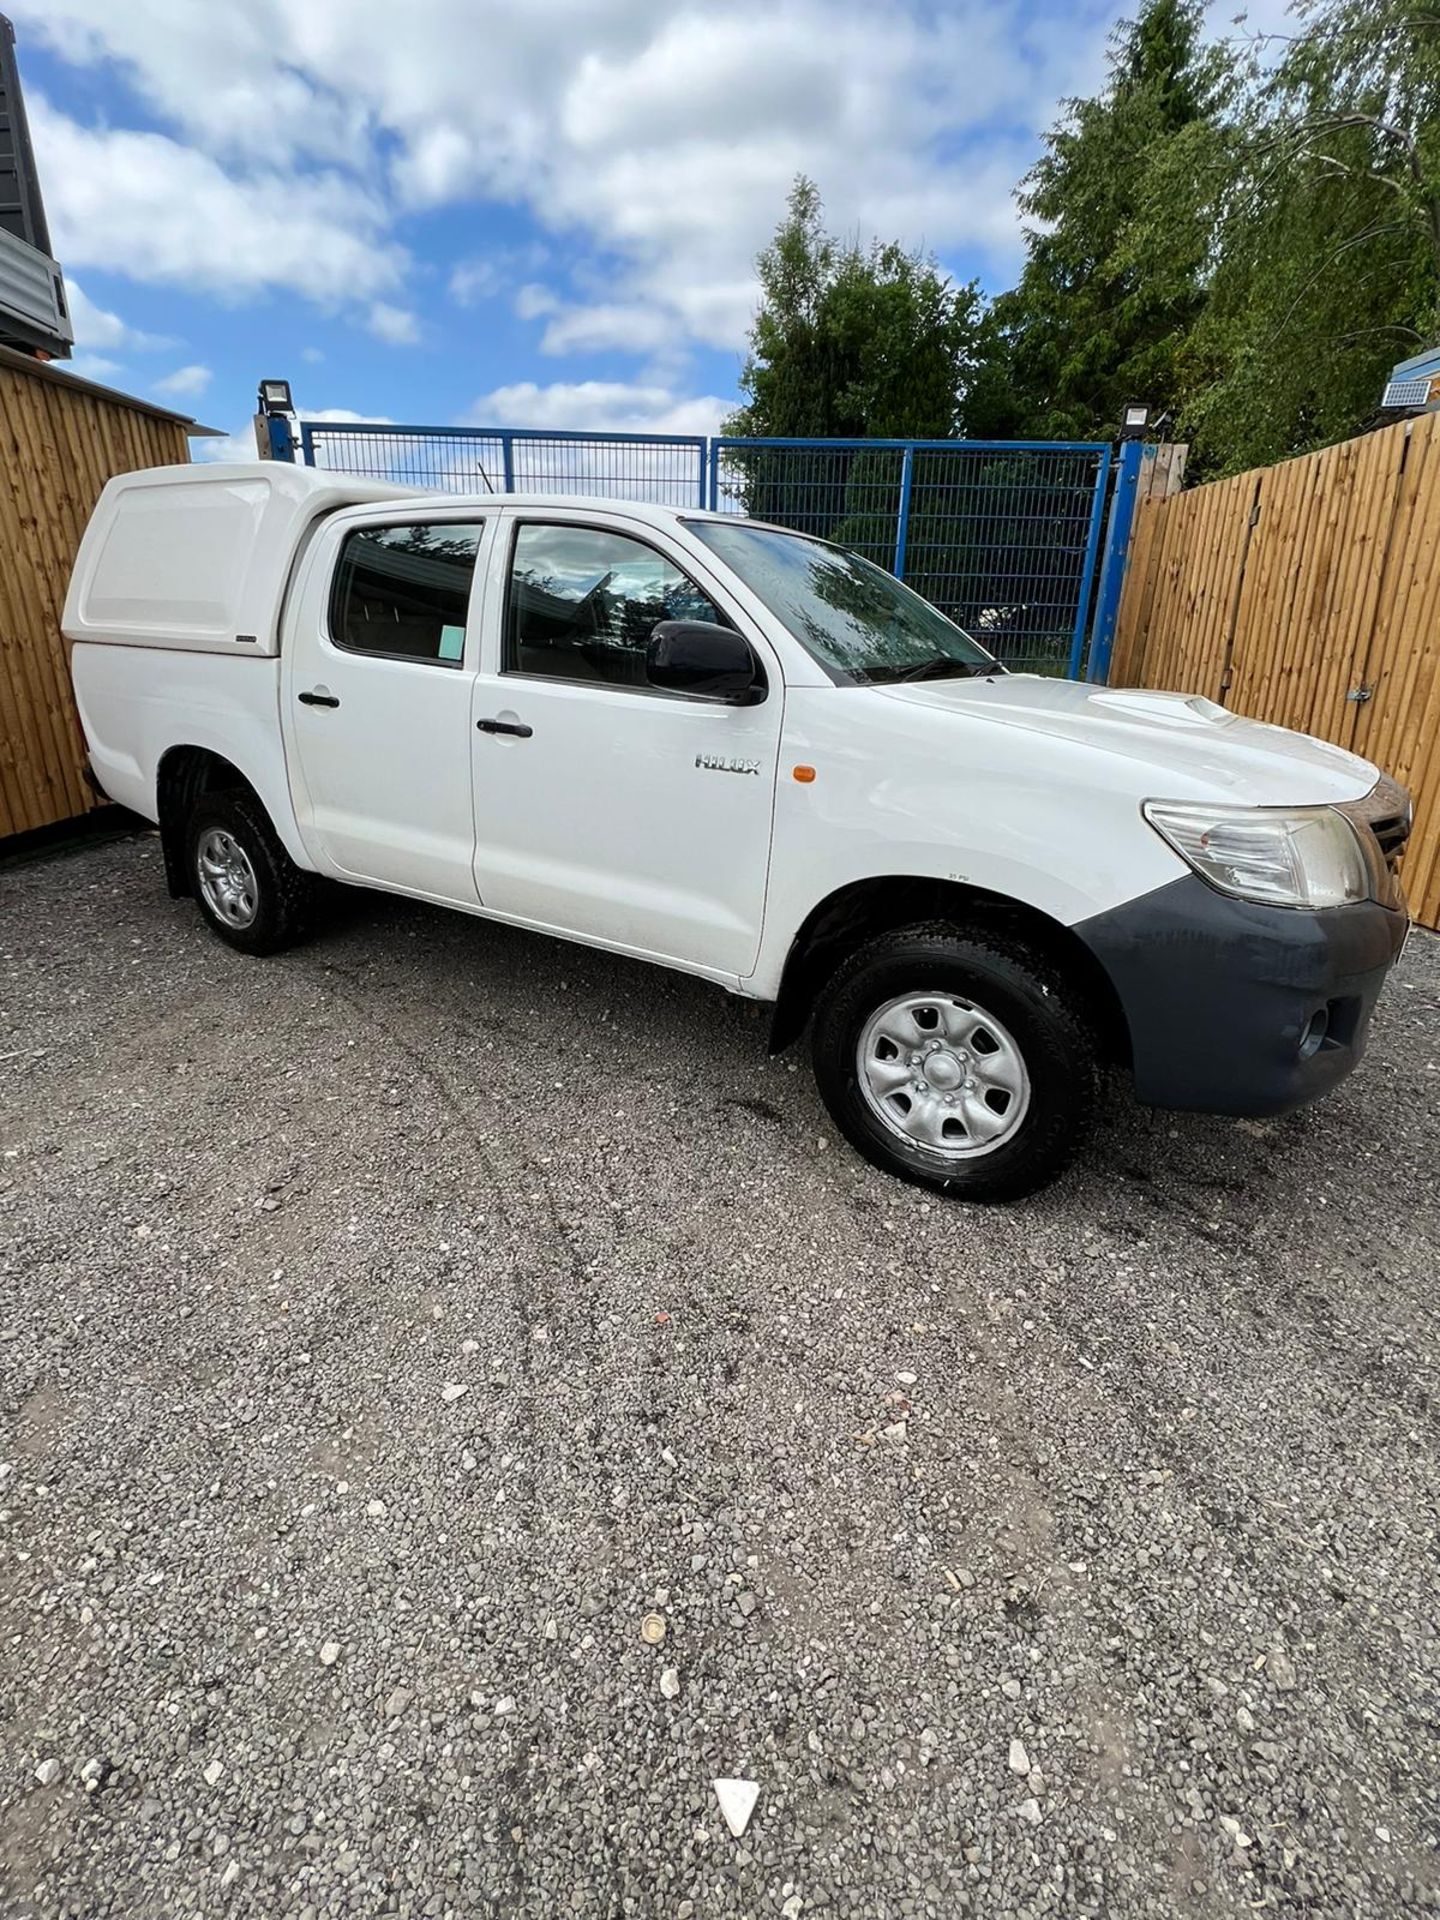 2012 TOYOTA HILUX HL2 PICK UP - DAB RADIO - A/C - ELECTRIC MIRRORS.